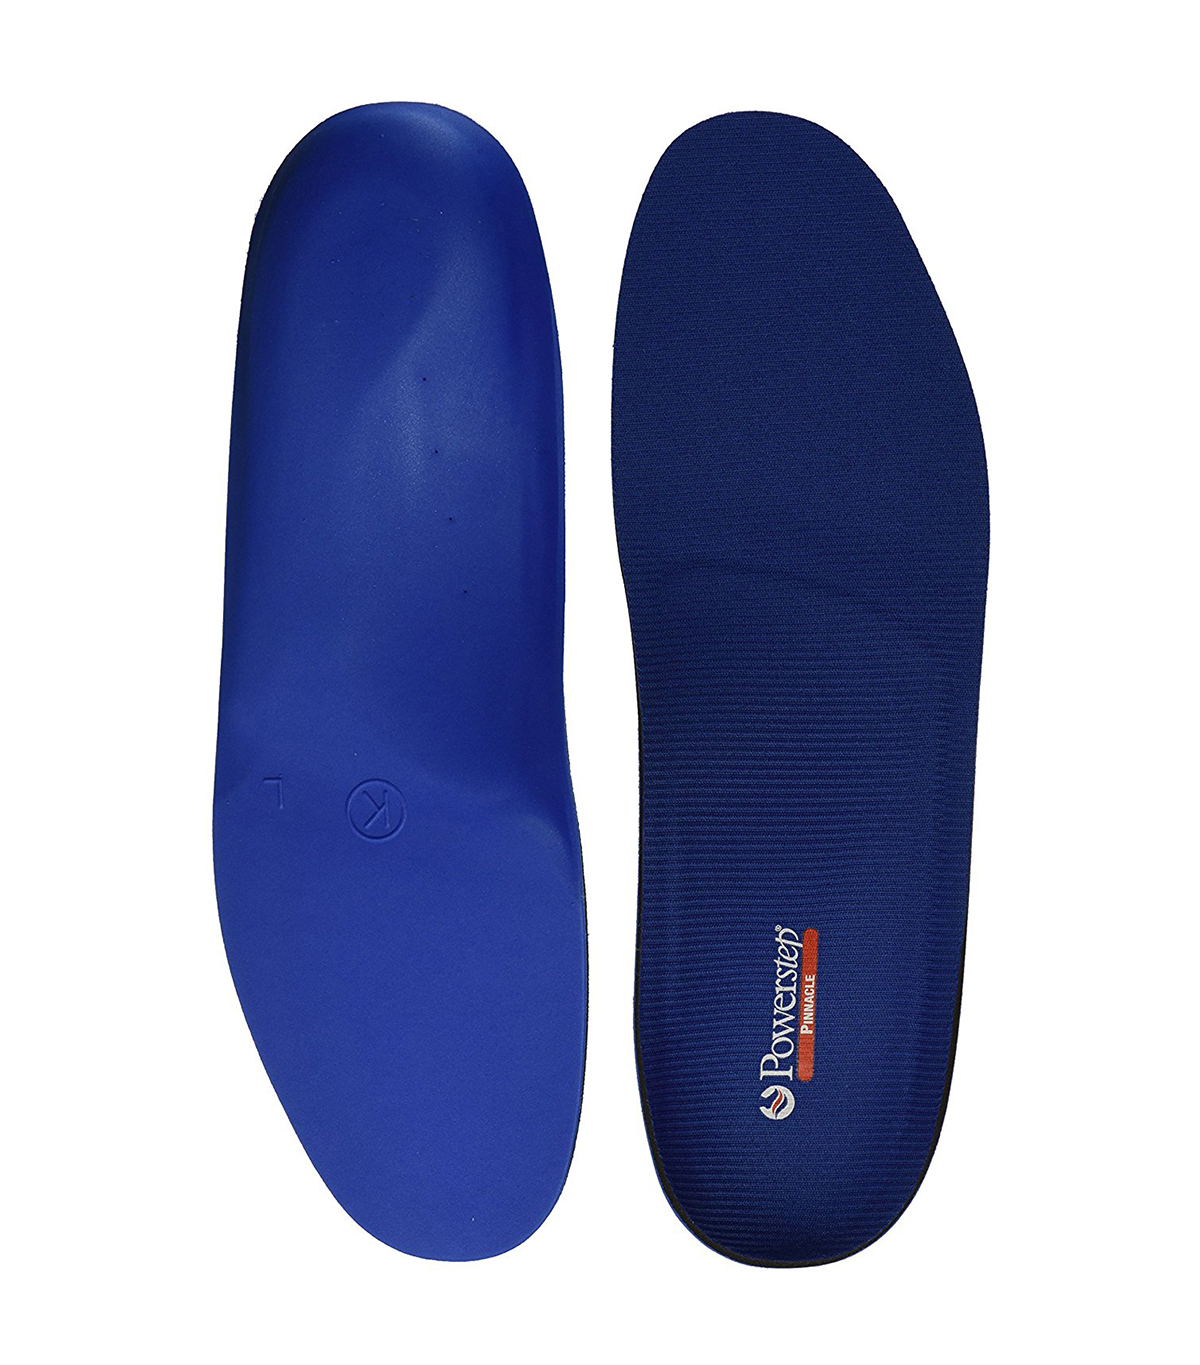 The 7 Best Insoles for Shoes of 2020 